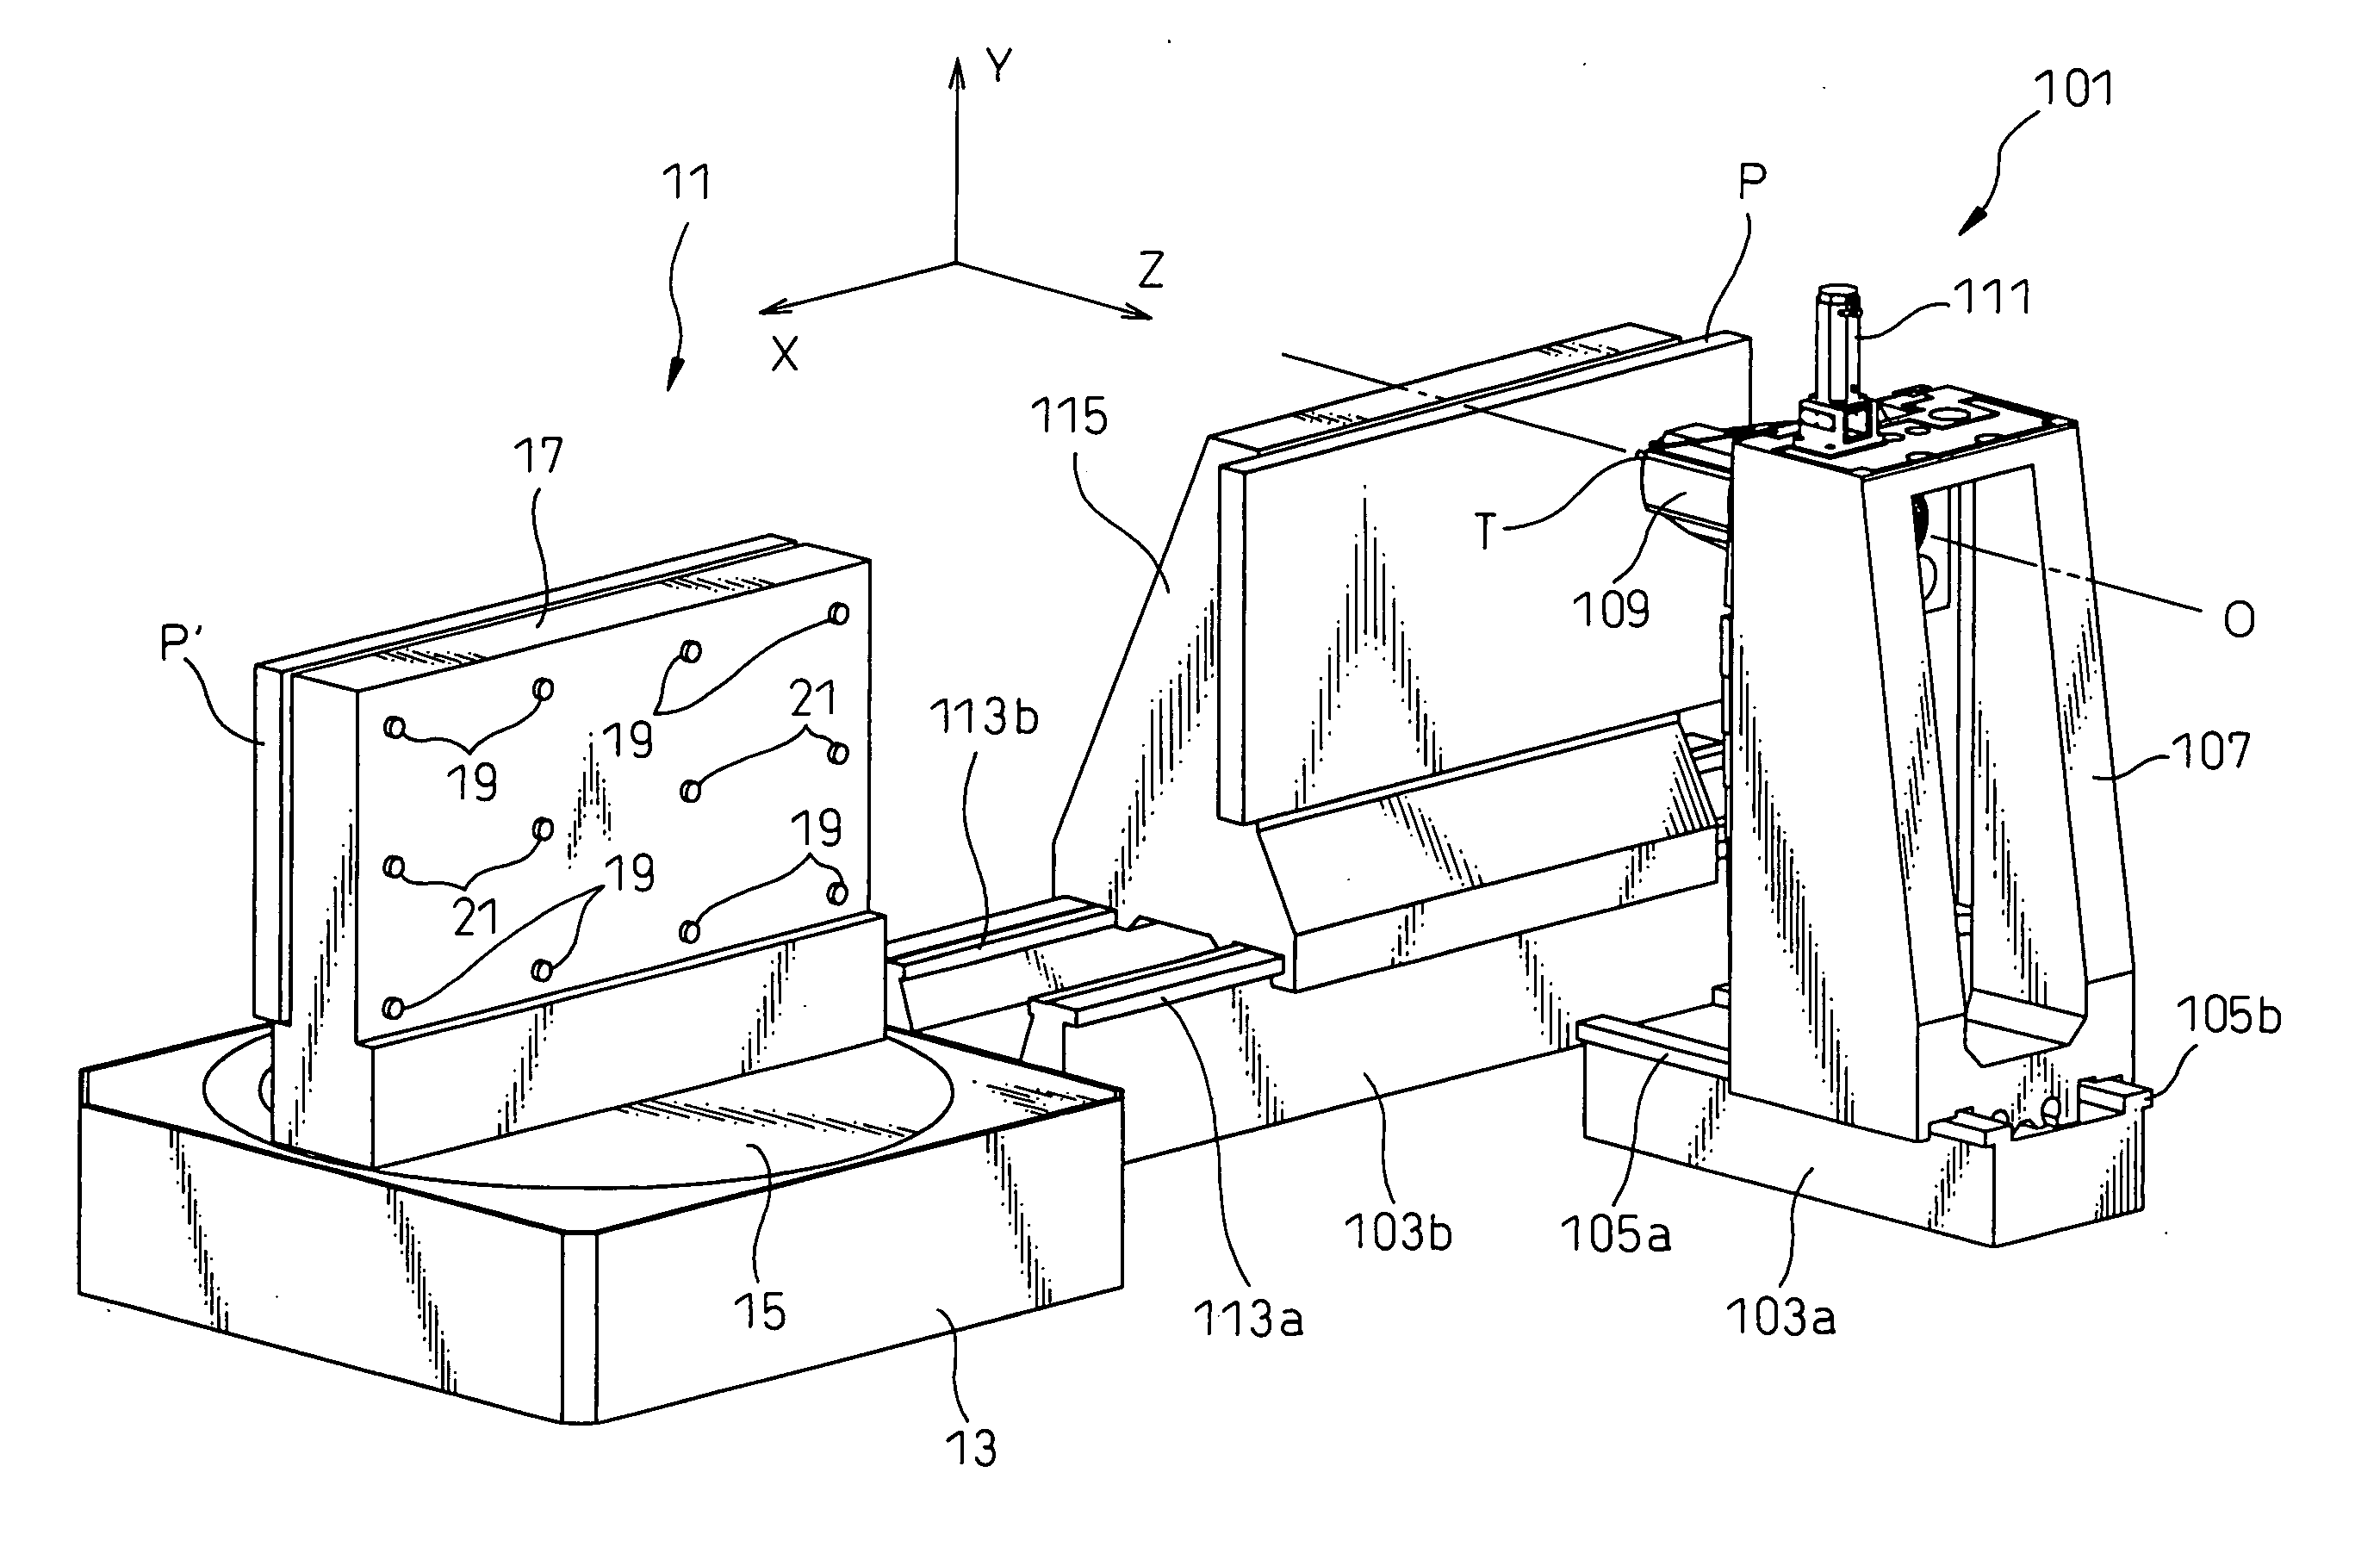 Pallet replacing device